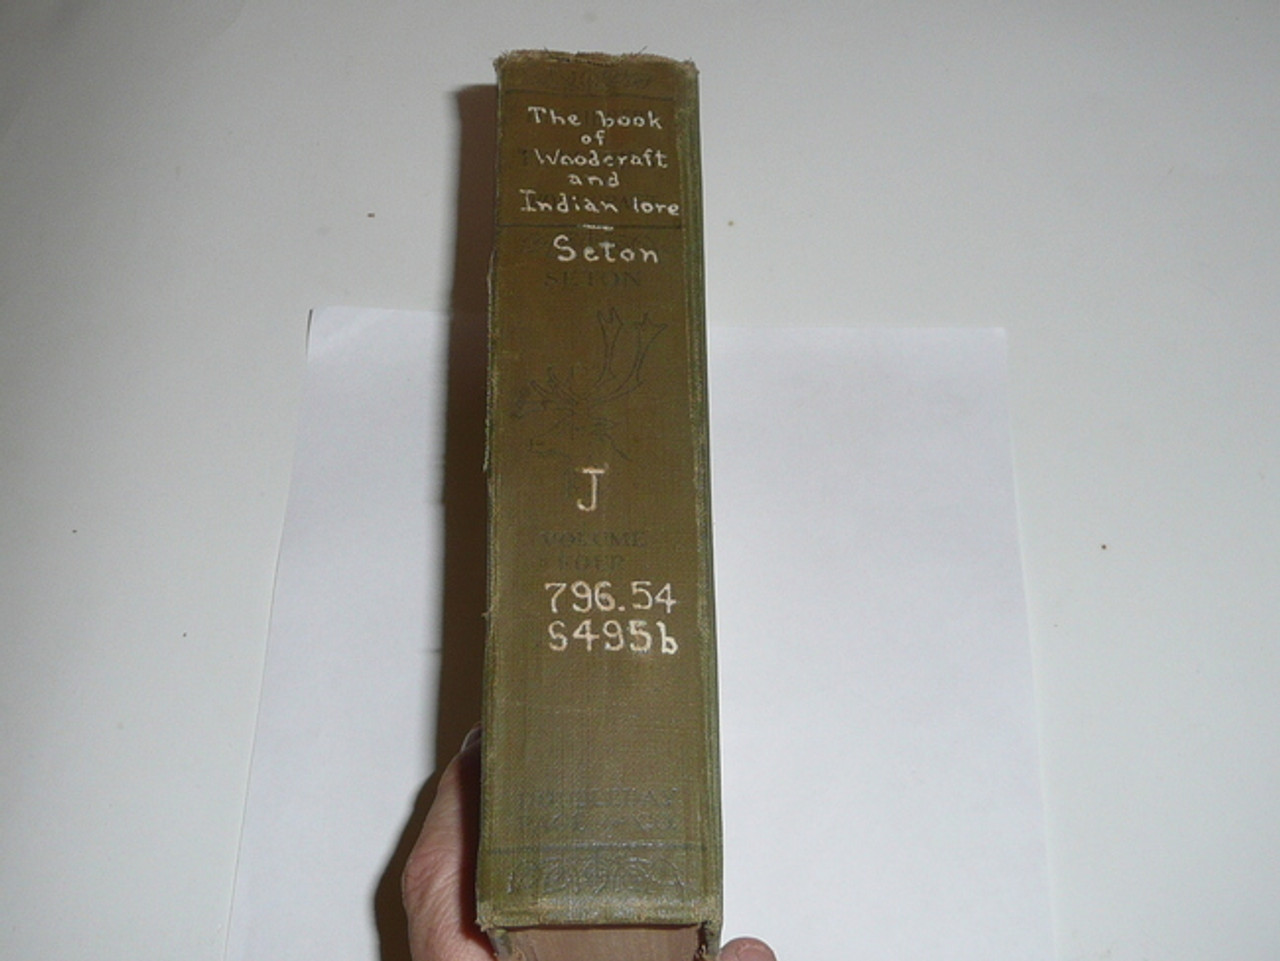 1925 The Book of Woodcraft and Indian Lore, By Ernest Thompson Seton, Library binding